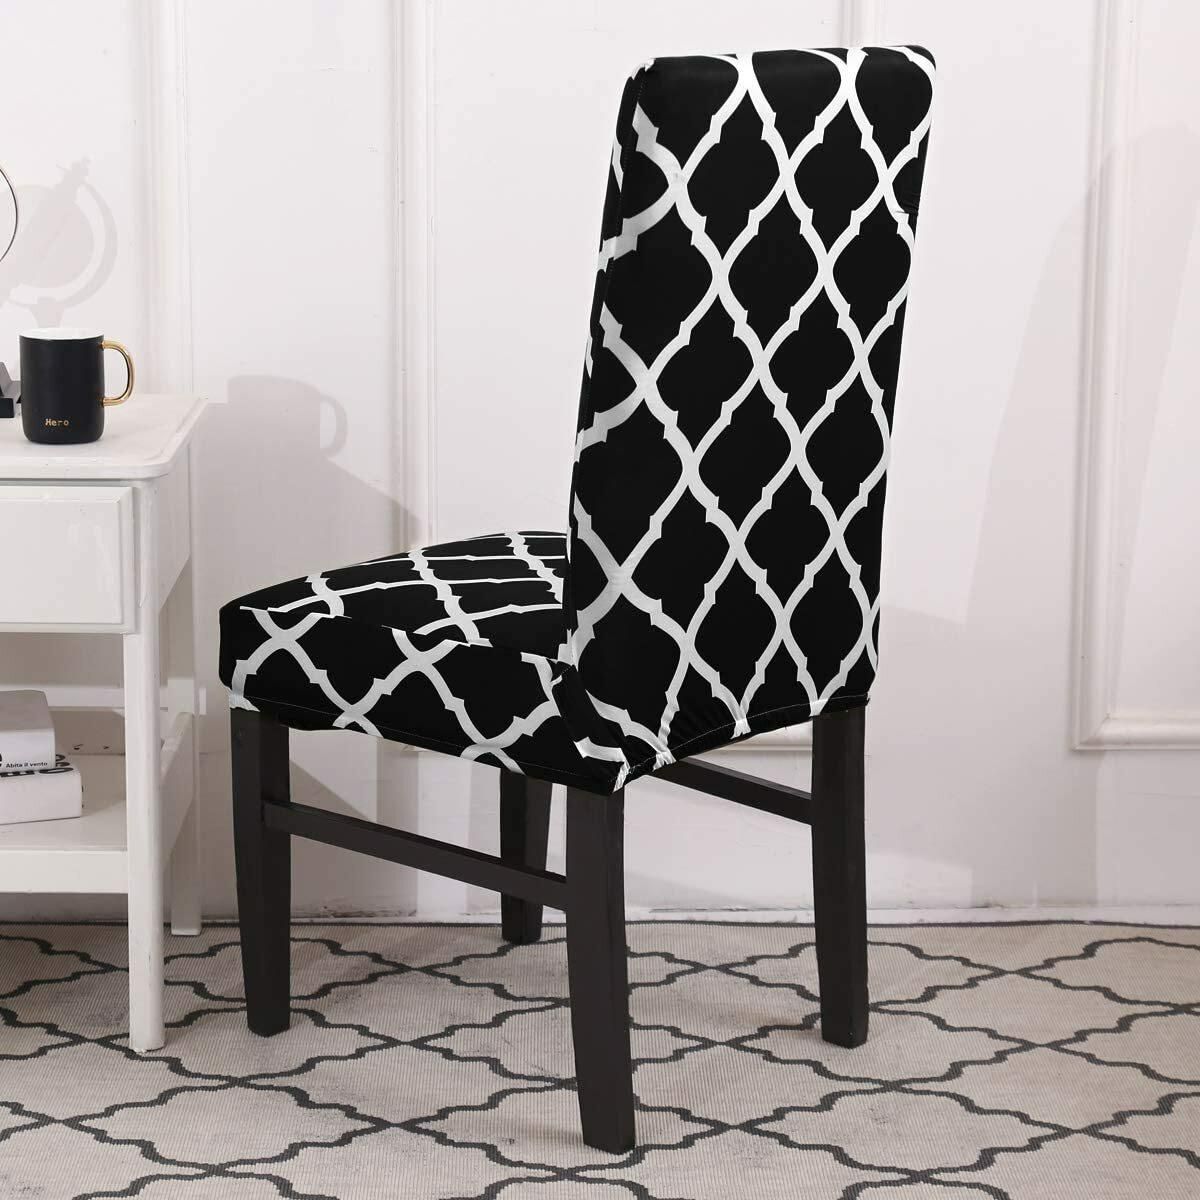 Padcod Dining Chair Cover Seat Protector Super Fit Slipcover Stretch Removable Washable Soft Spandex Fabric For Home Hotel Dining Room Ceremony Banquet Wedding Party Restaurant 4 Per Set Black